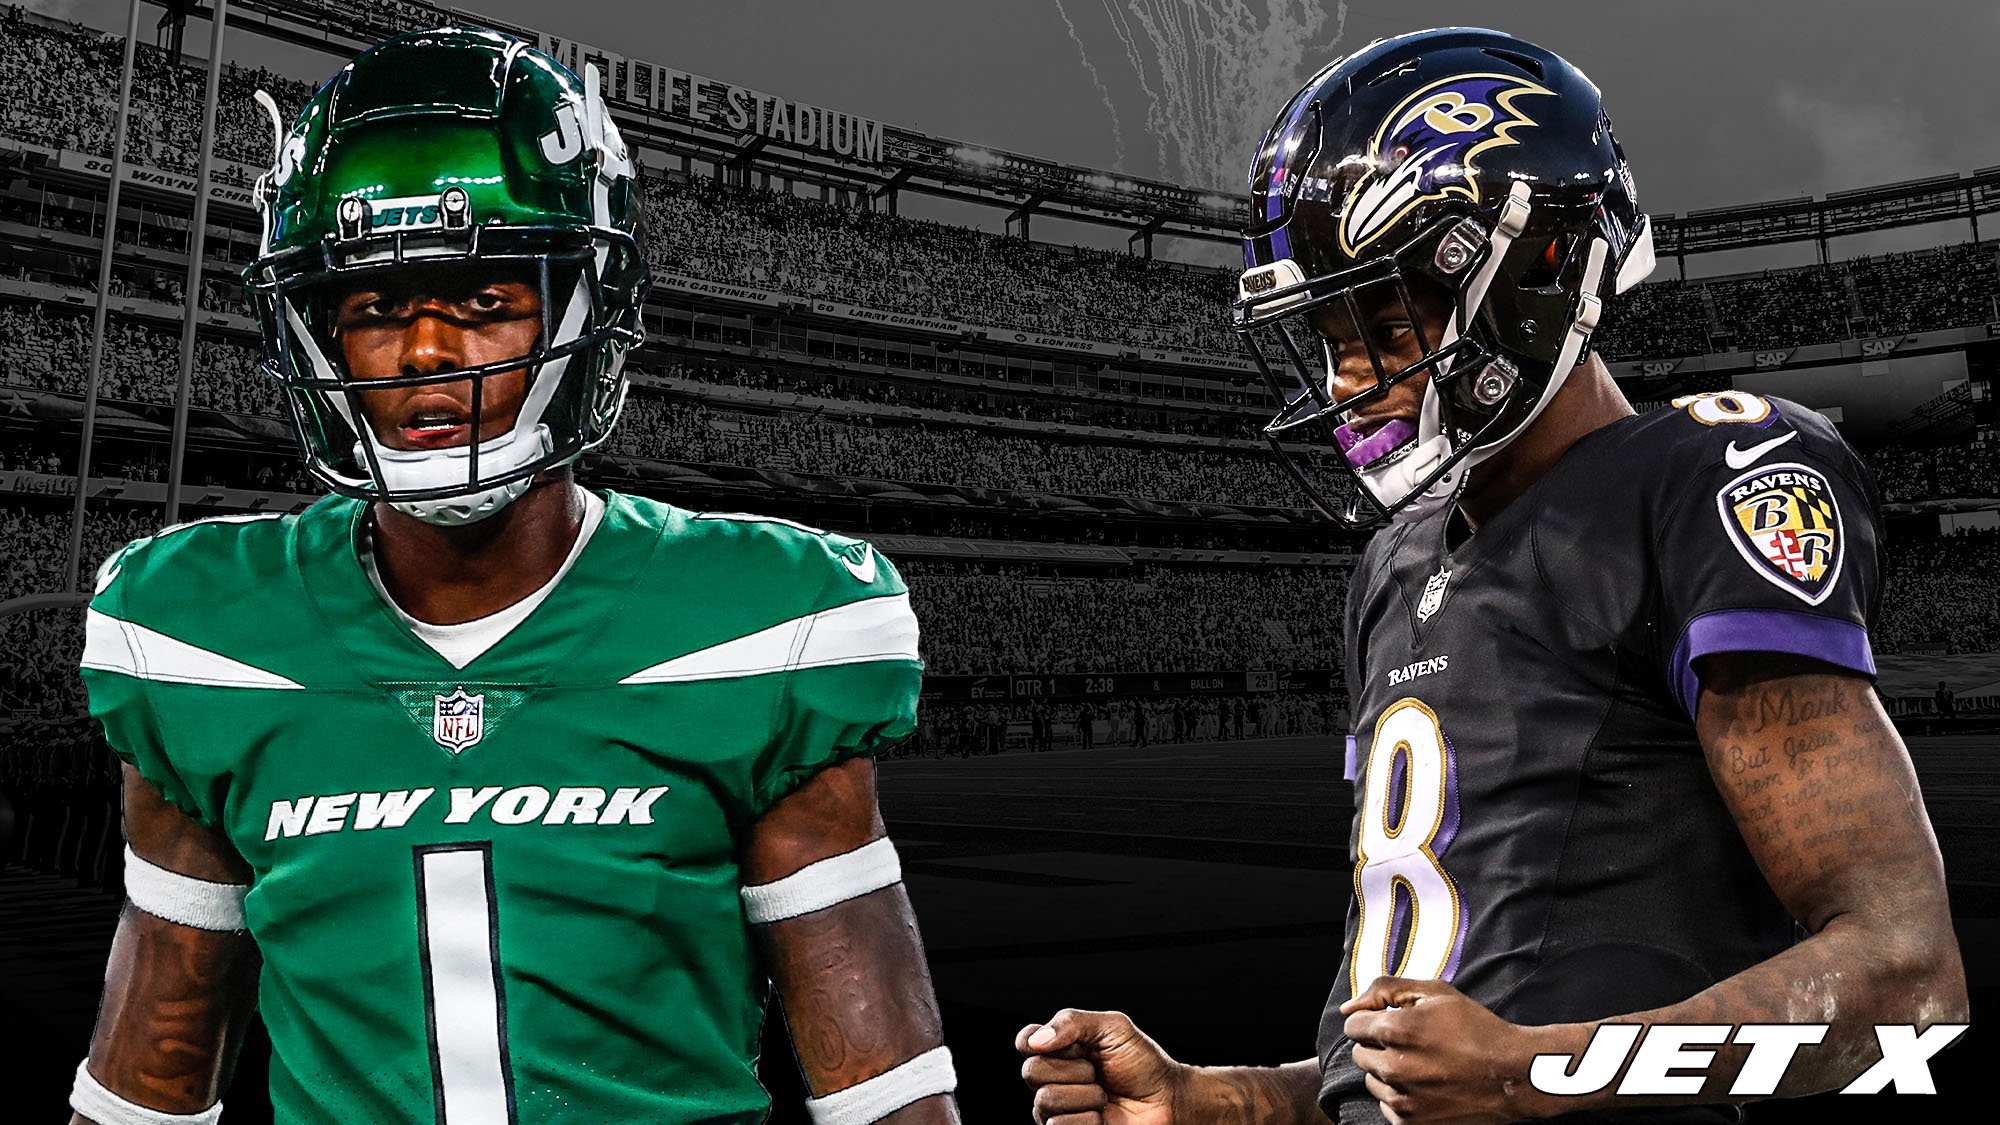 NY Jets players line up for Lamar Jackson jerseys after he destroyed Jets